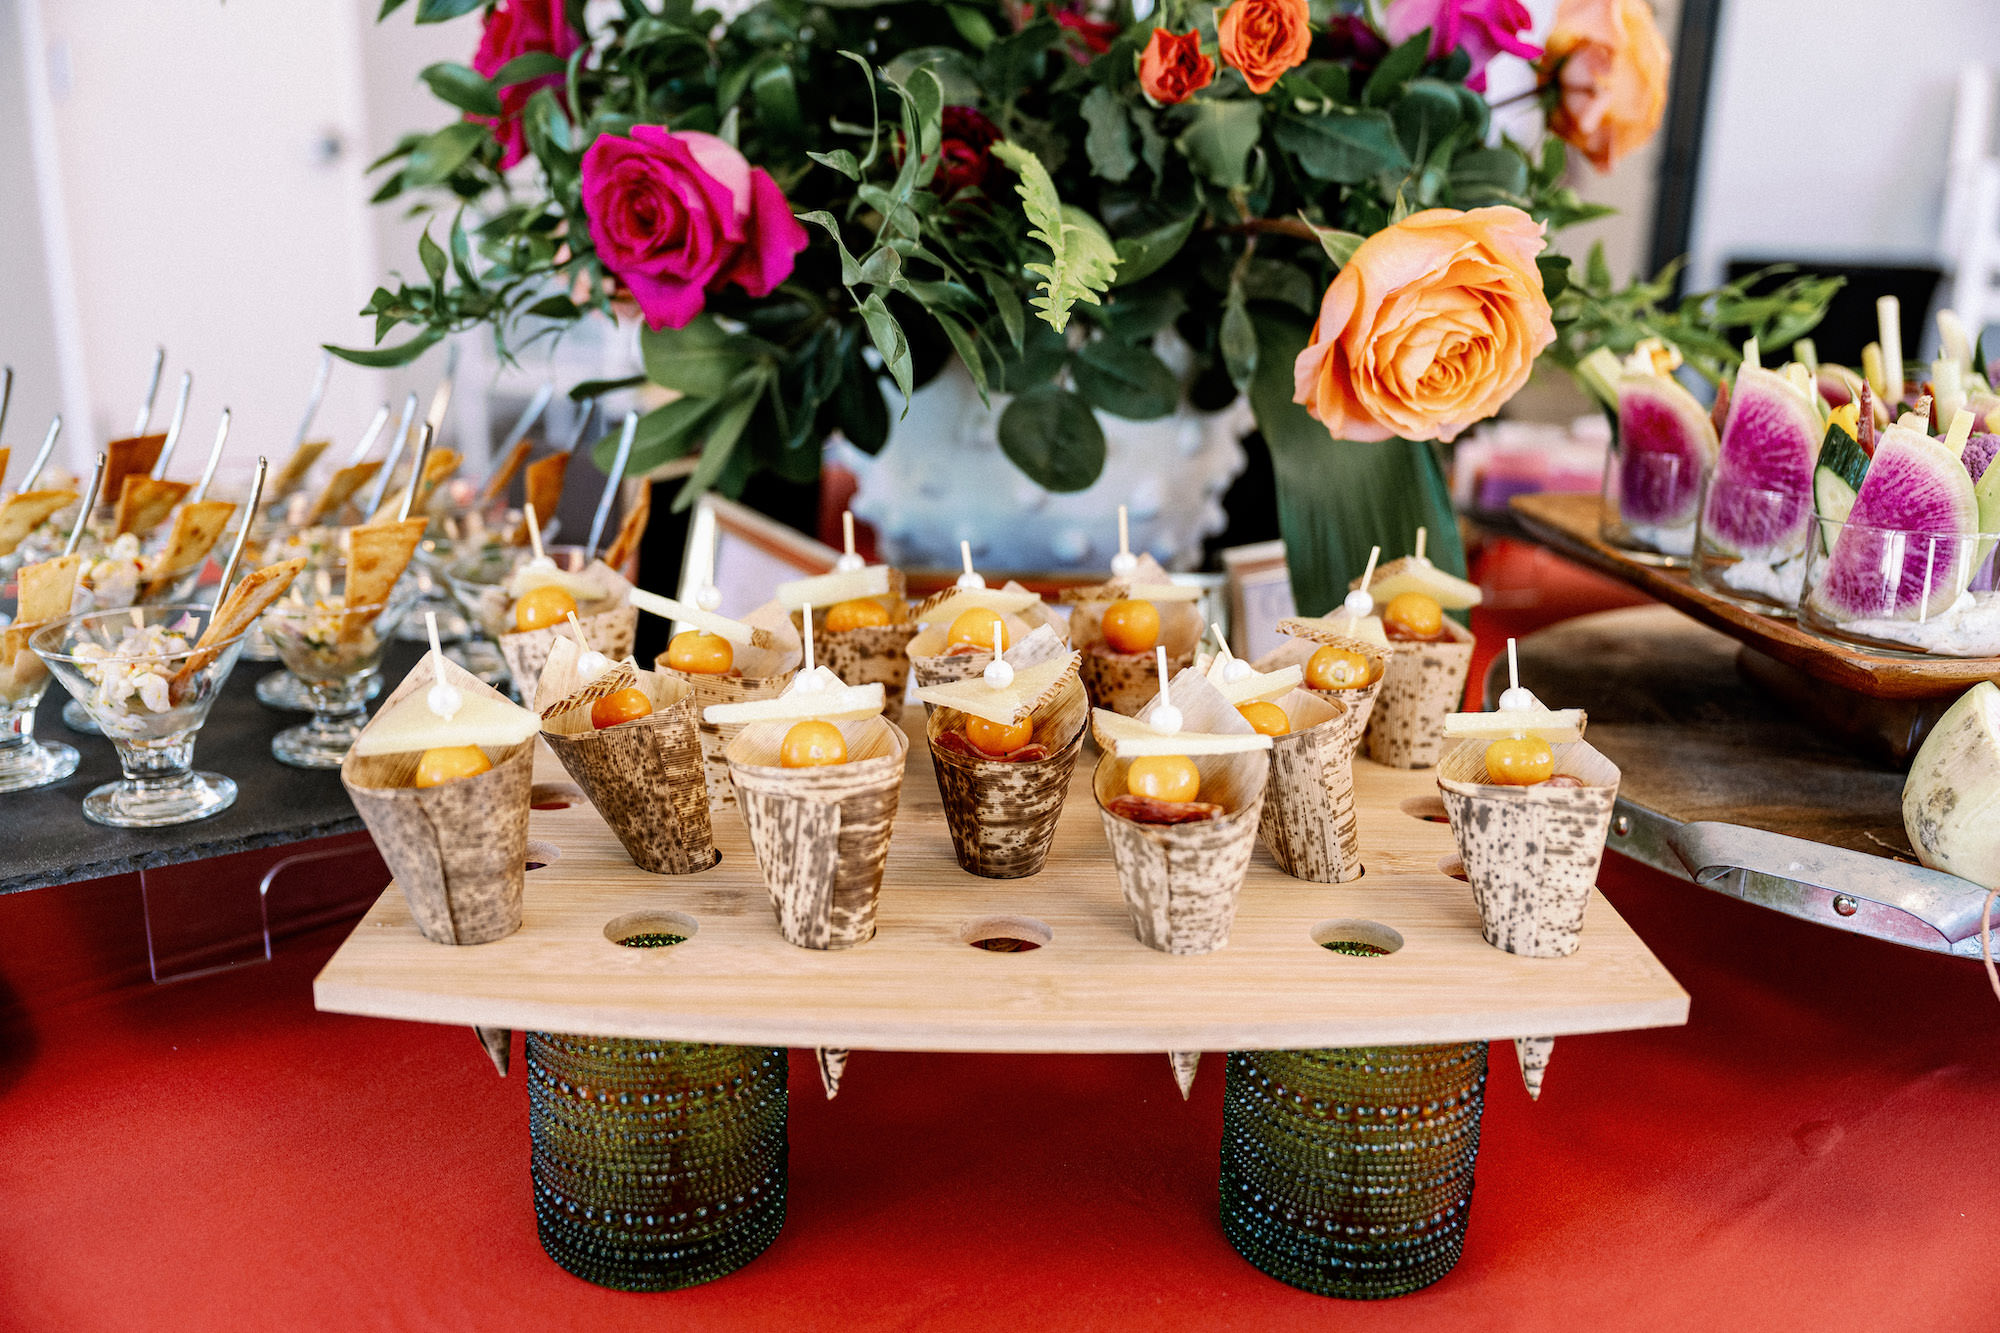 Tampa Bay Catering Company Elite Events Catering | Dewitt for Love Photography | Cheese and Charcuterie Cones